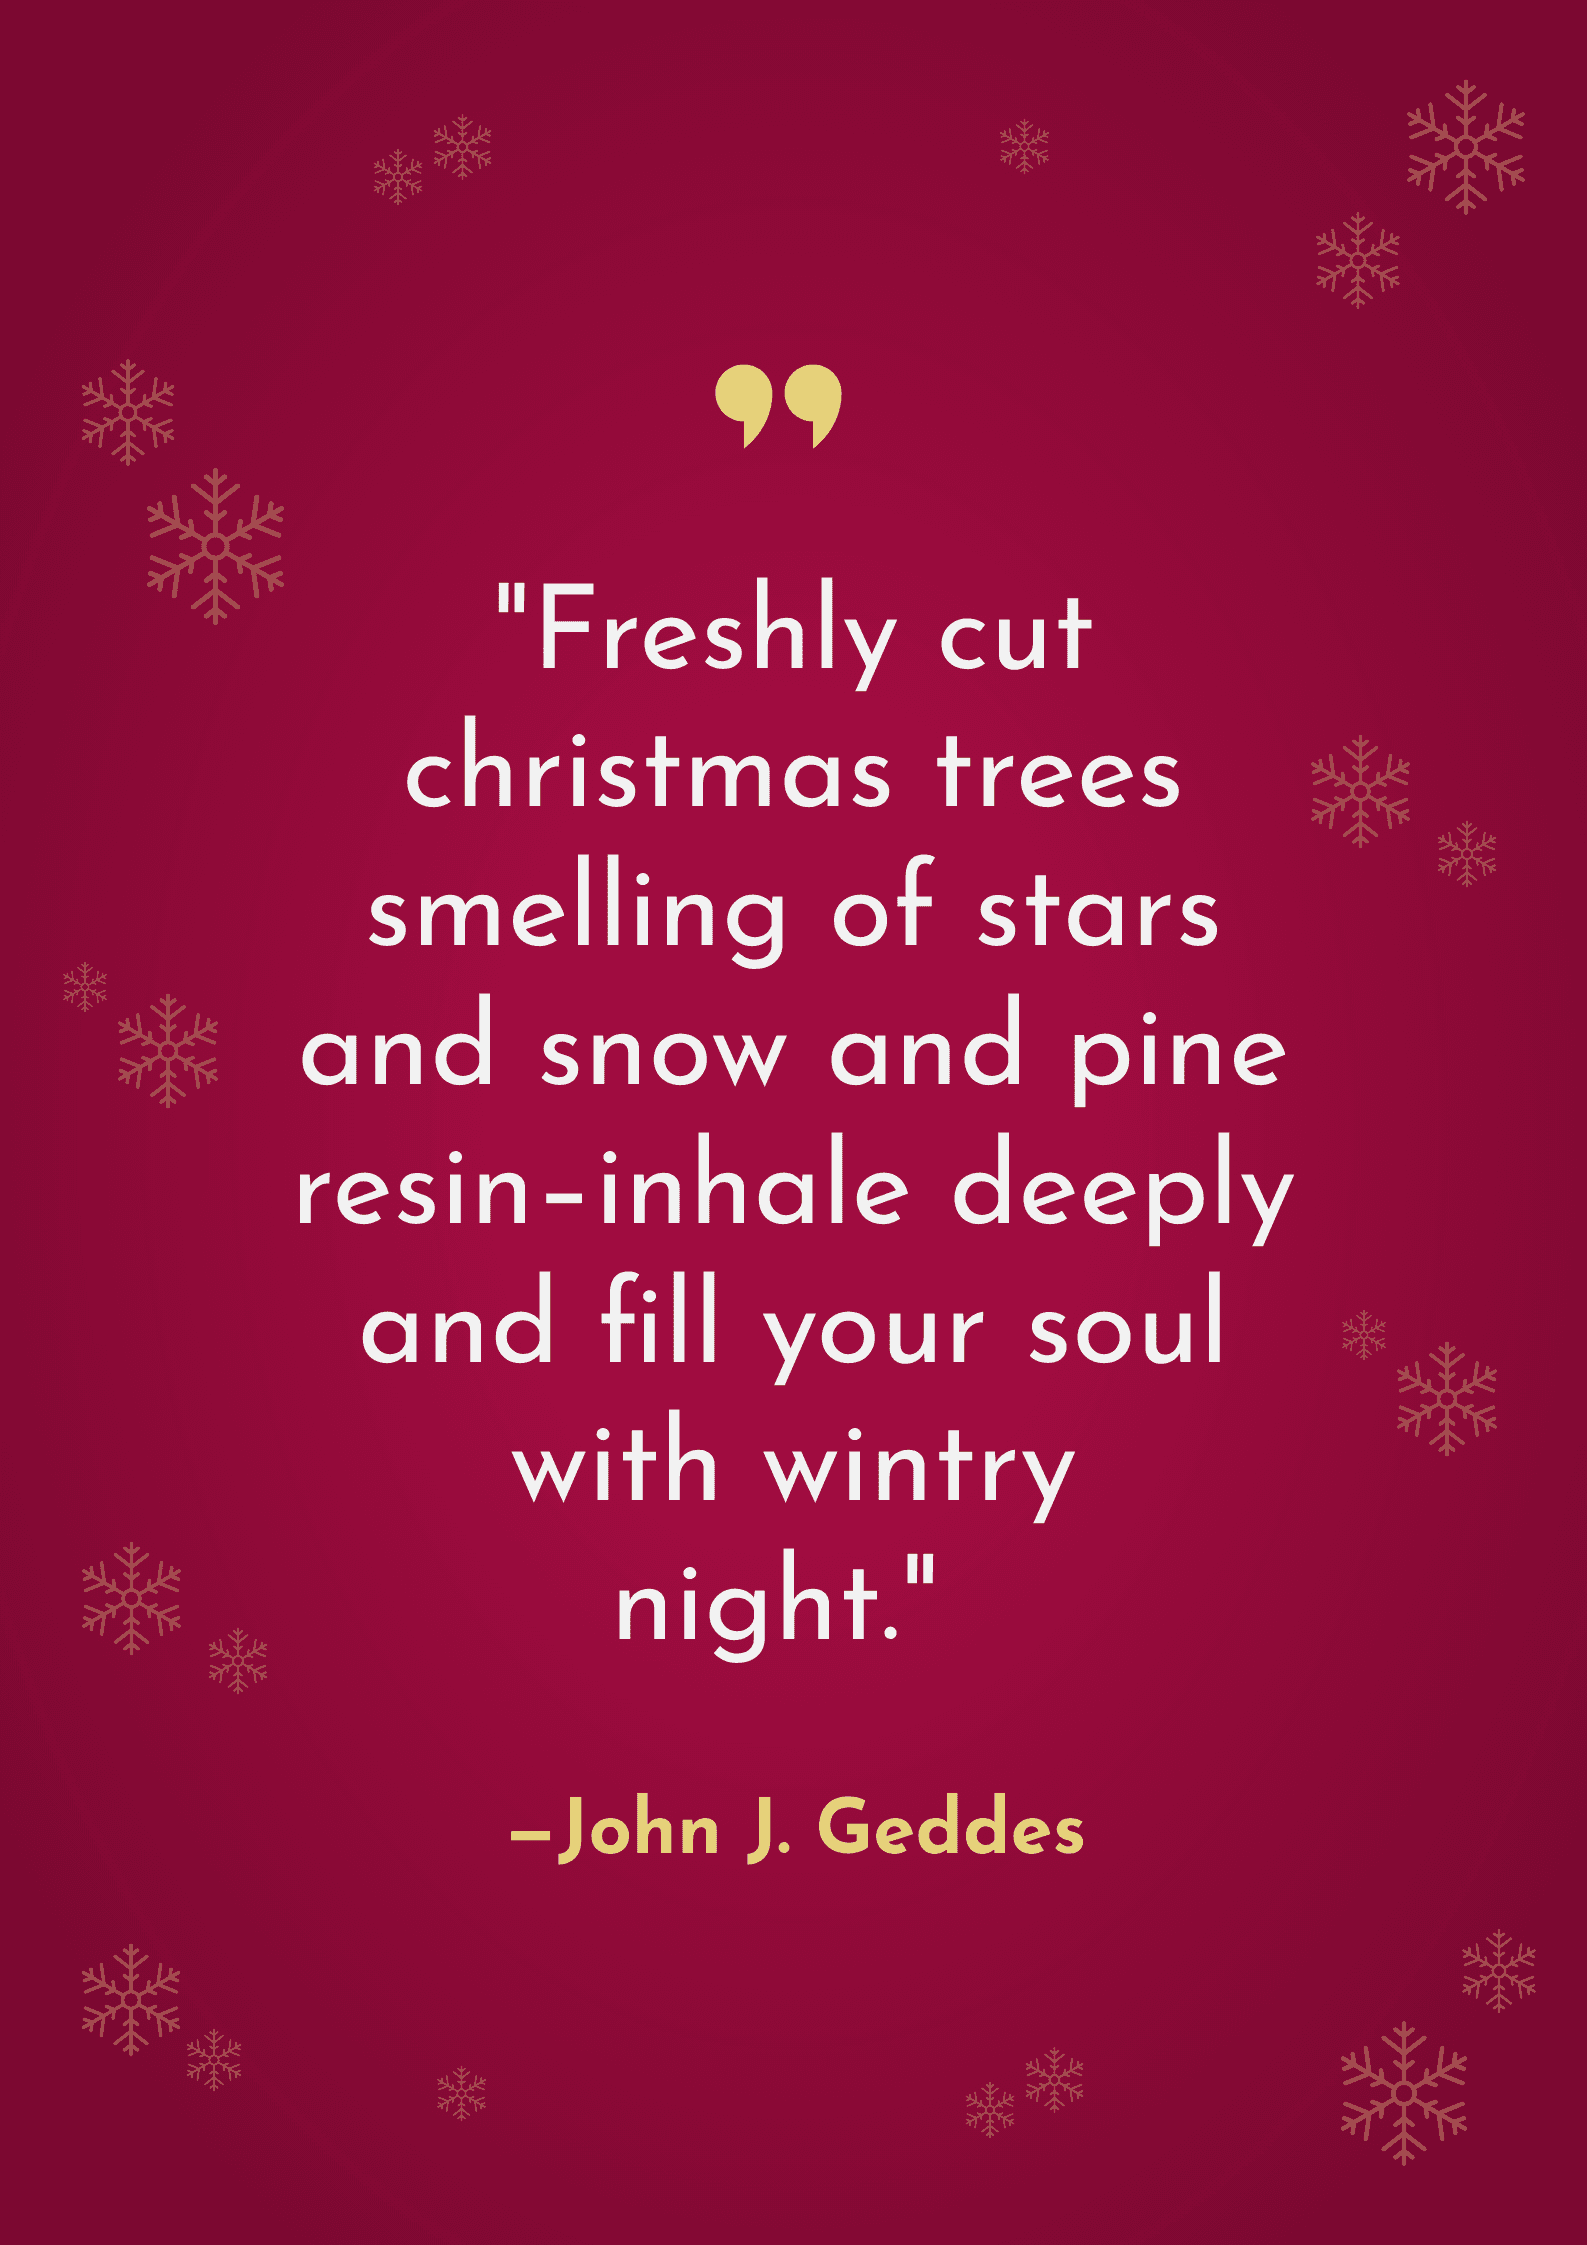 red-freshly-cut-christmas-trees-christmas-quote-poster-template-thumbnail-img